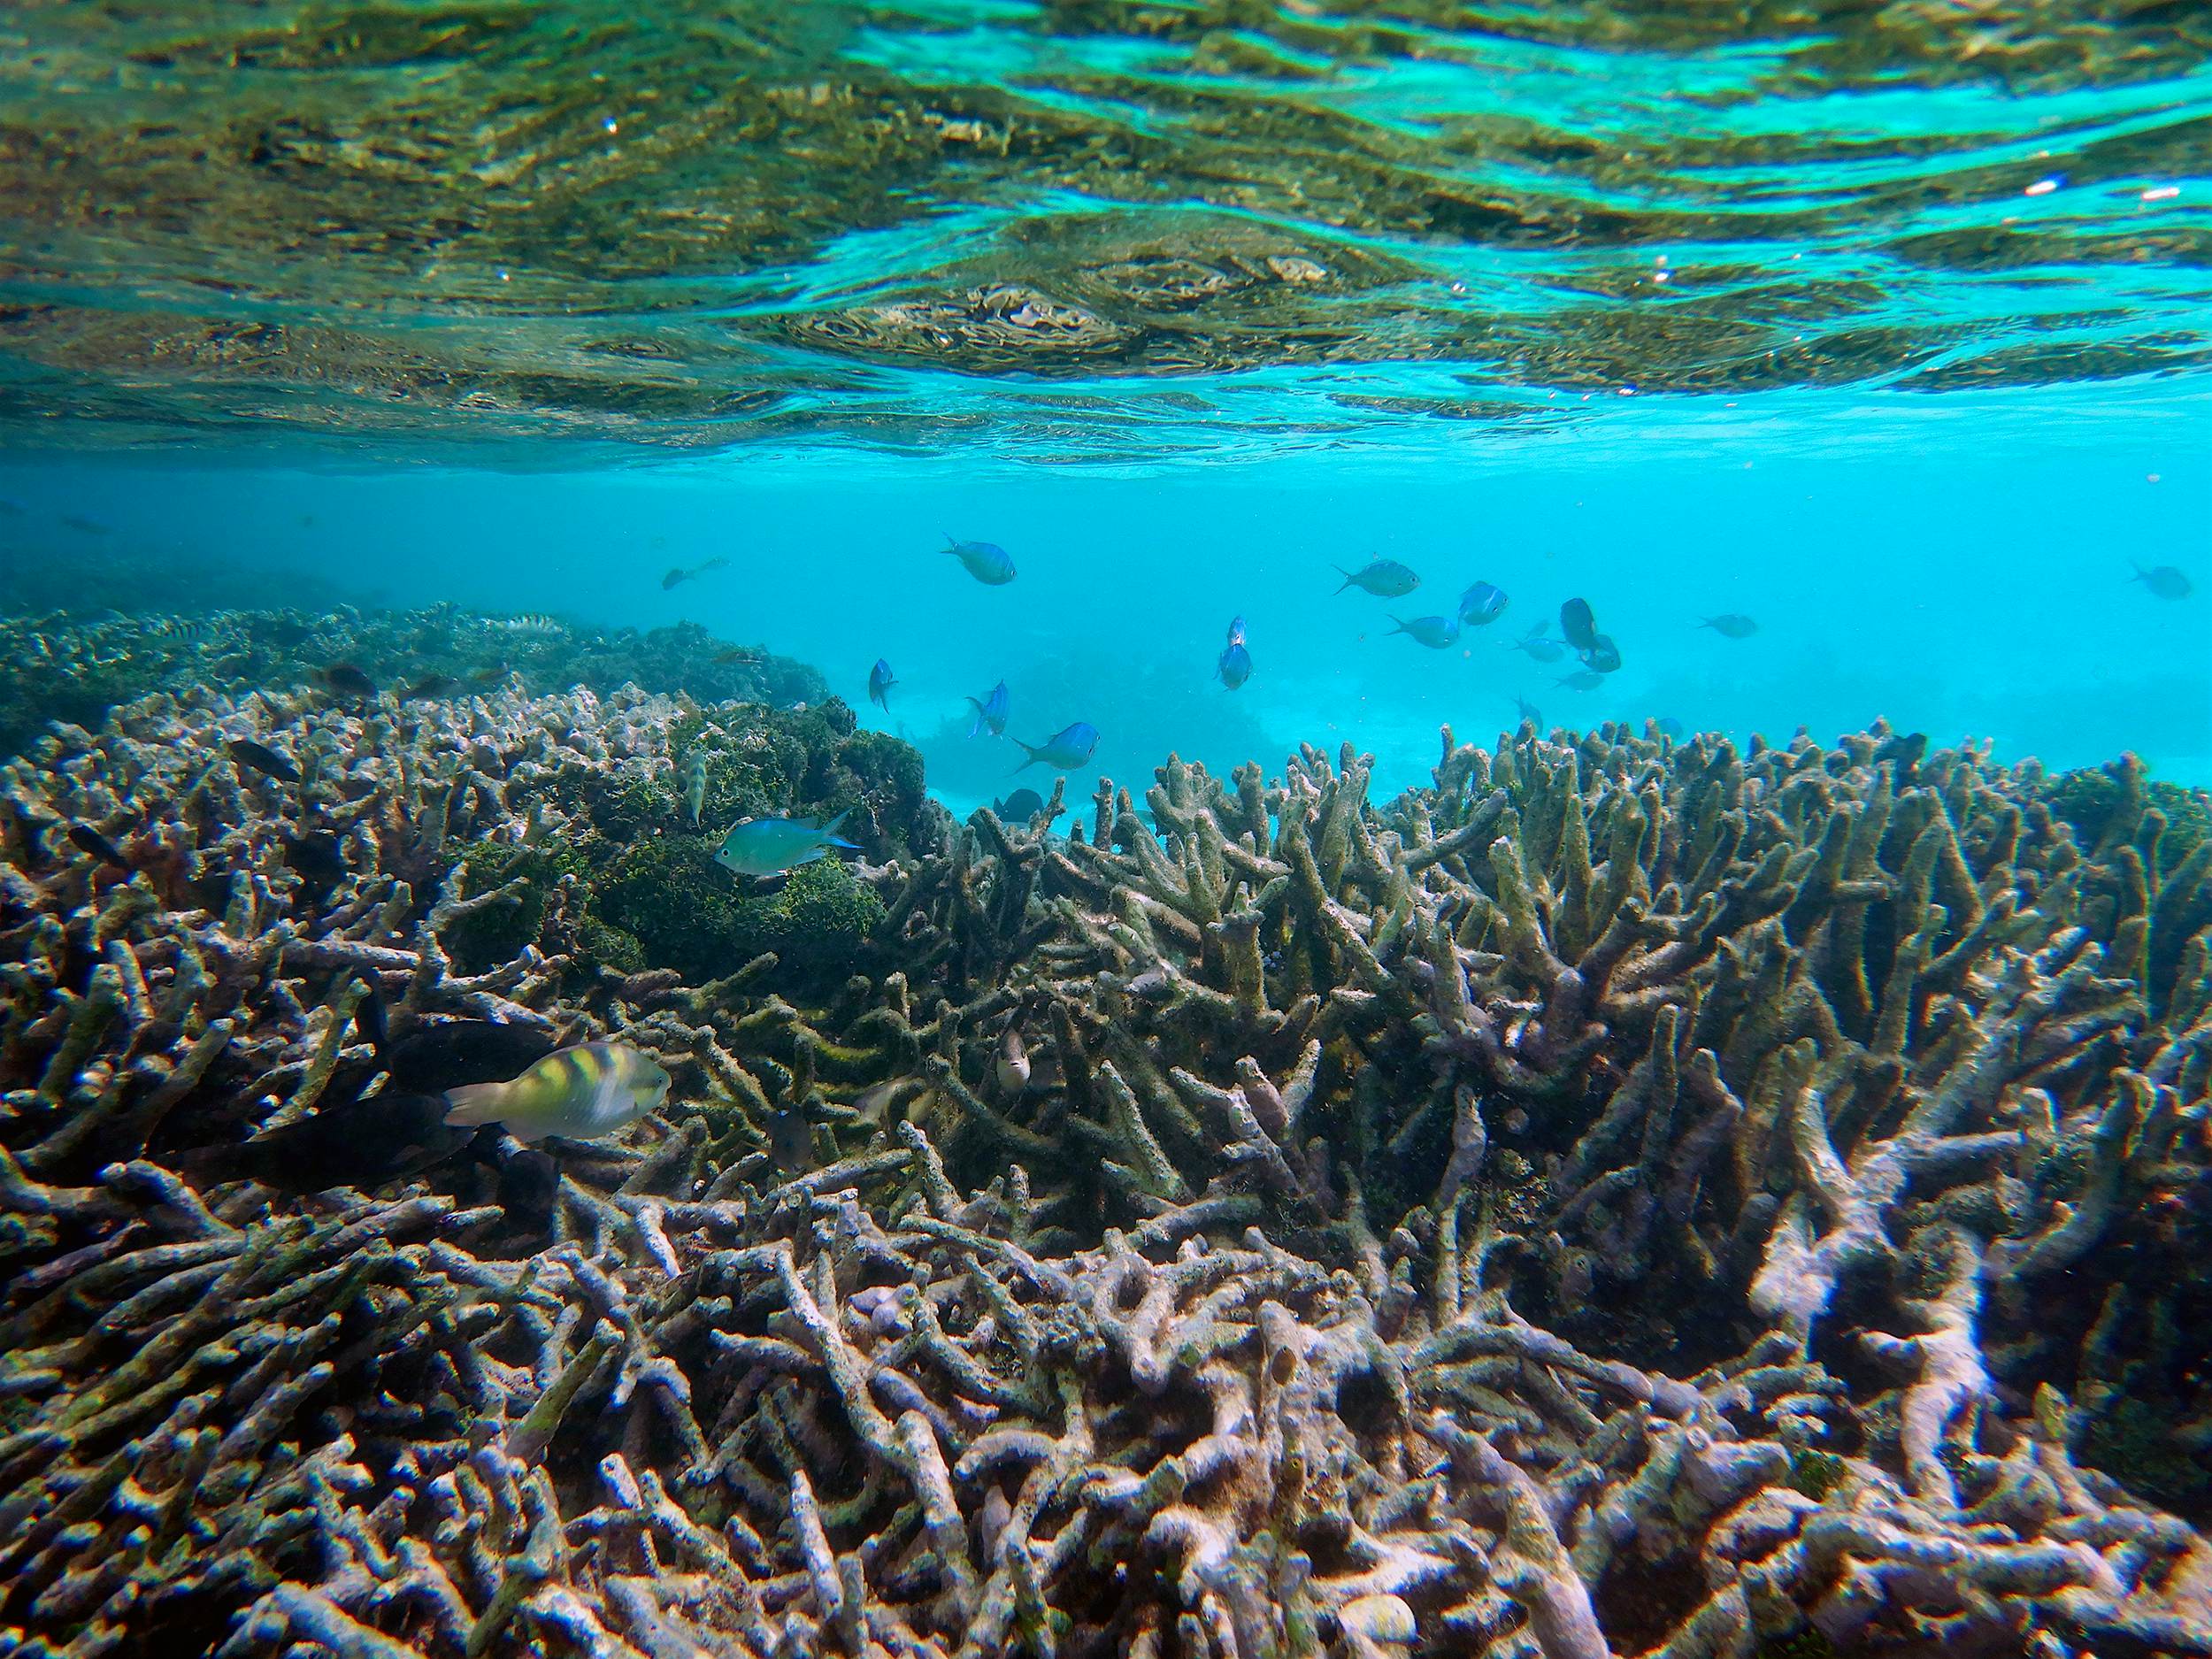 Green chromis fish swimming at low tide in Maldivian reef showing evidence of coral bleaching